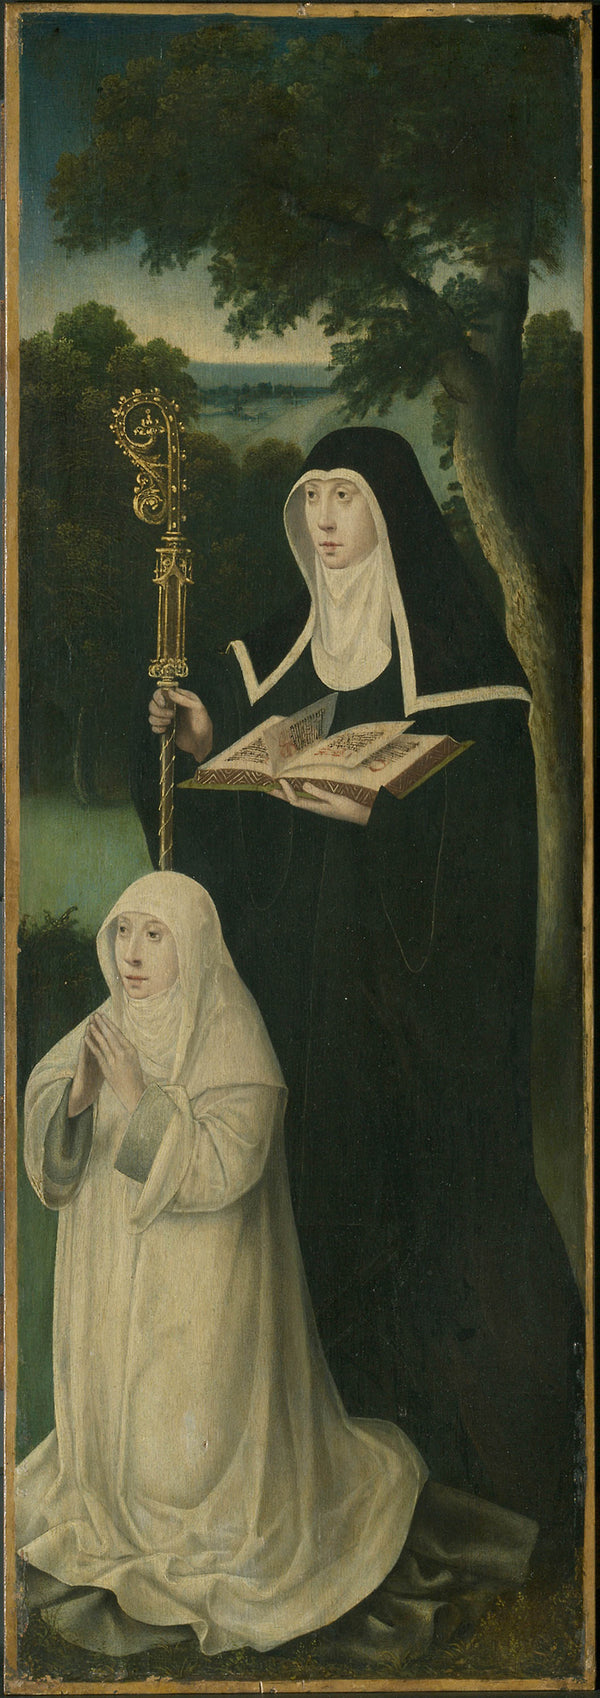 northern-netherlandish-school-1550-saint-gertrude-of-nivelles-and-an-augustinian-canoness-art-print-fine-art-reproduction-wall-art-id-aqj2snwfq